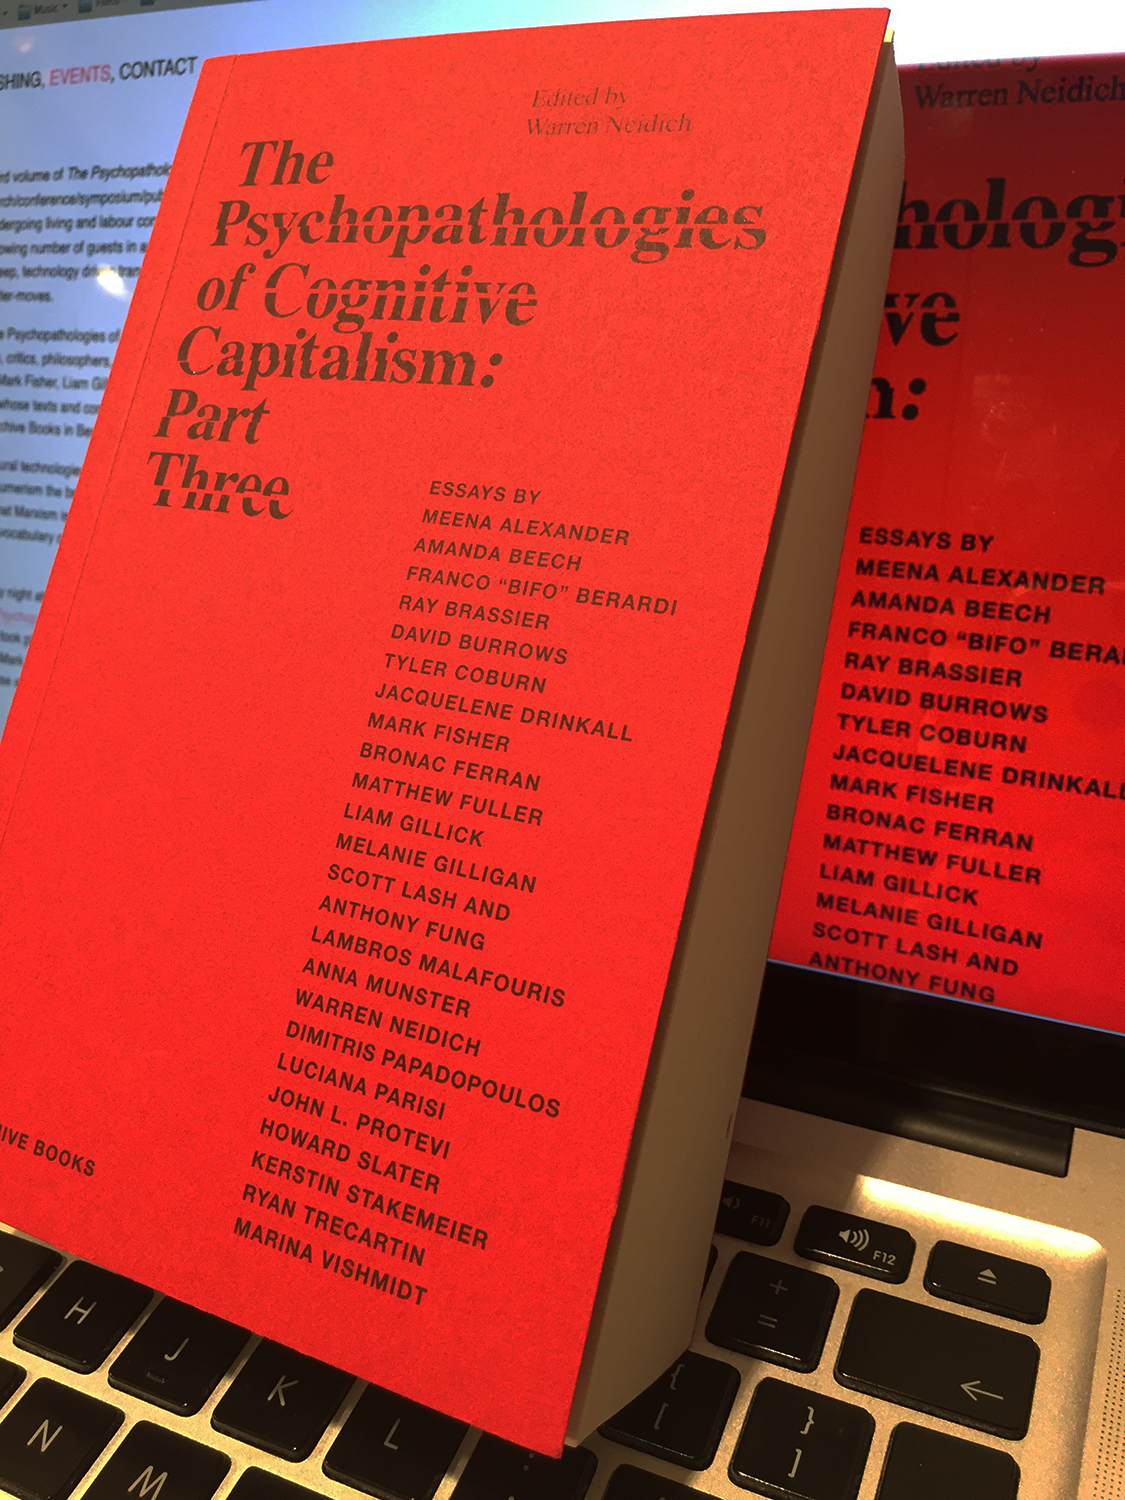  - BOOK LAUNCH The Psychopathologies of Cognitive Capitalism Part Three, with Warren Neidich